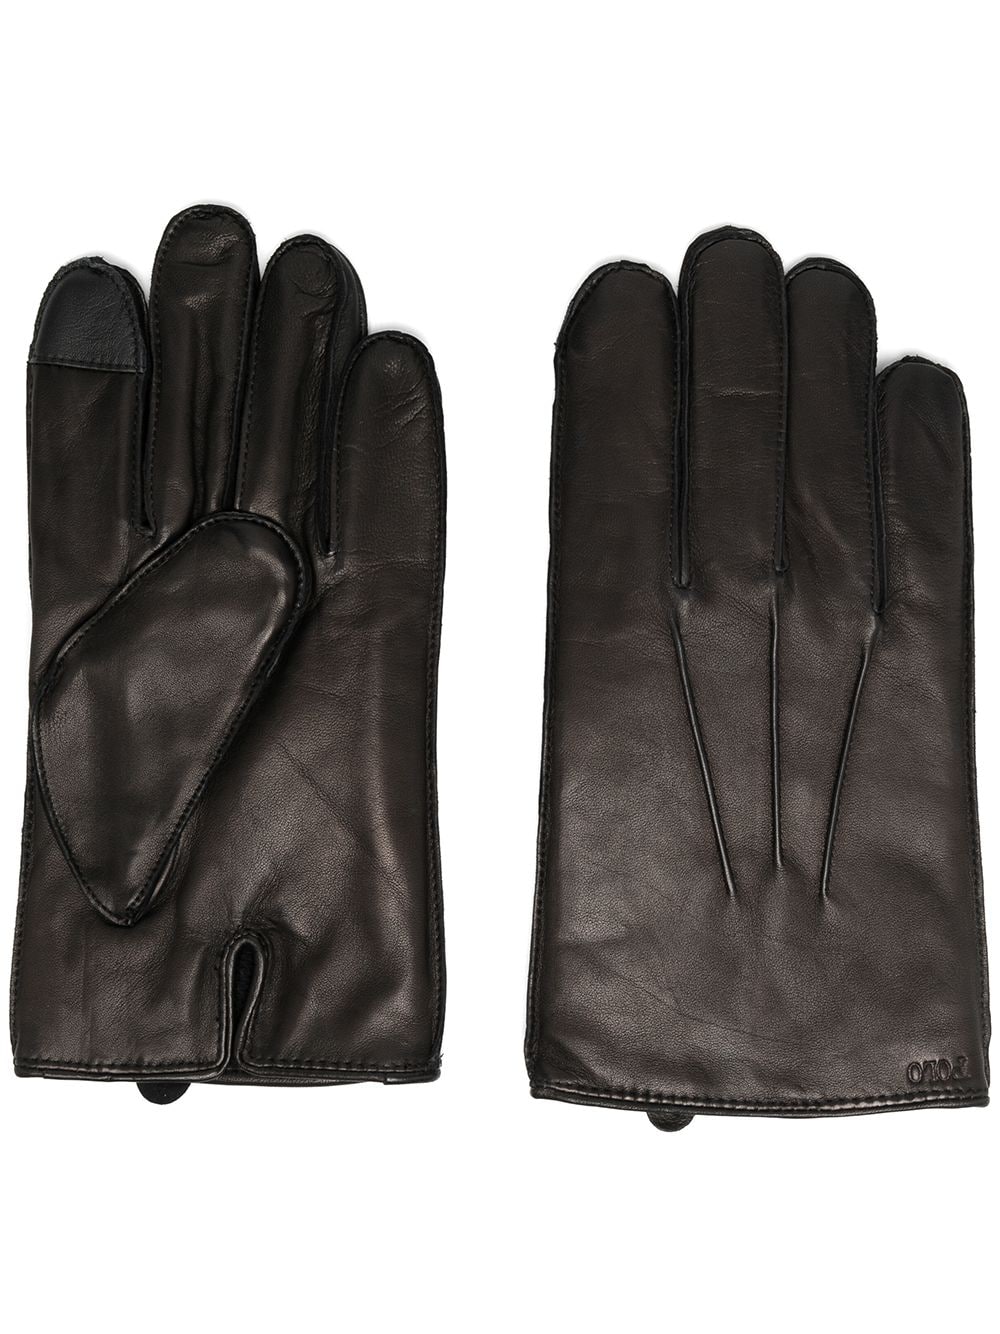 Polo Ralph Lauren Everyday Leather Gloves - Farfetch